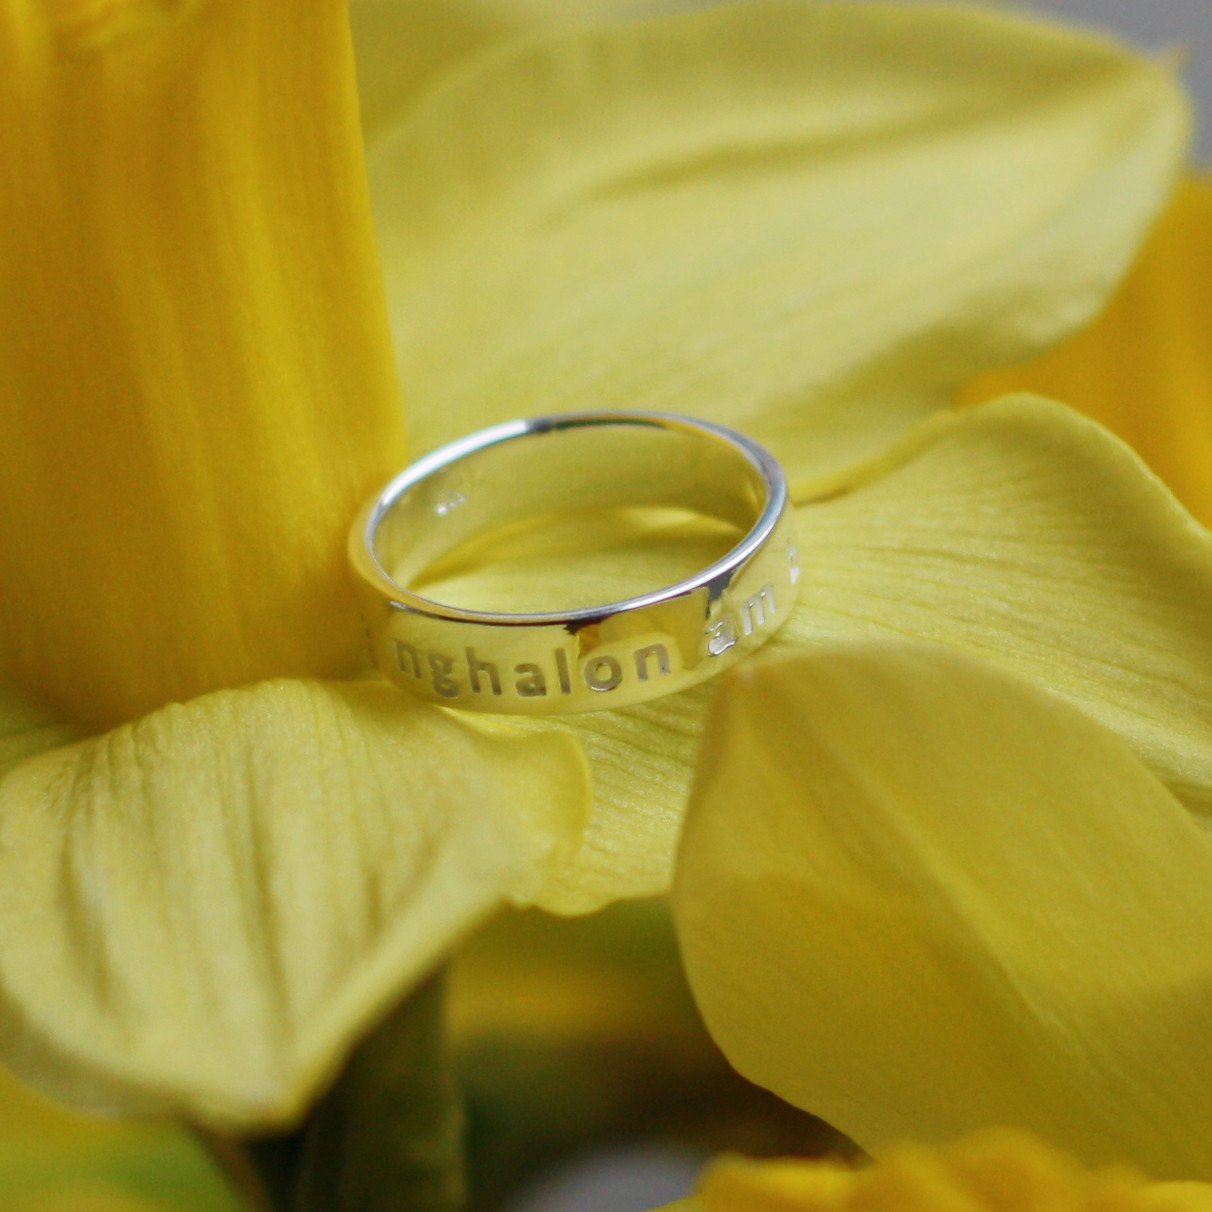 Yn Fy Nghalon Am Byth Sterling Silver or Gold Plated Ring